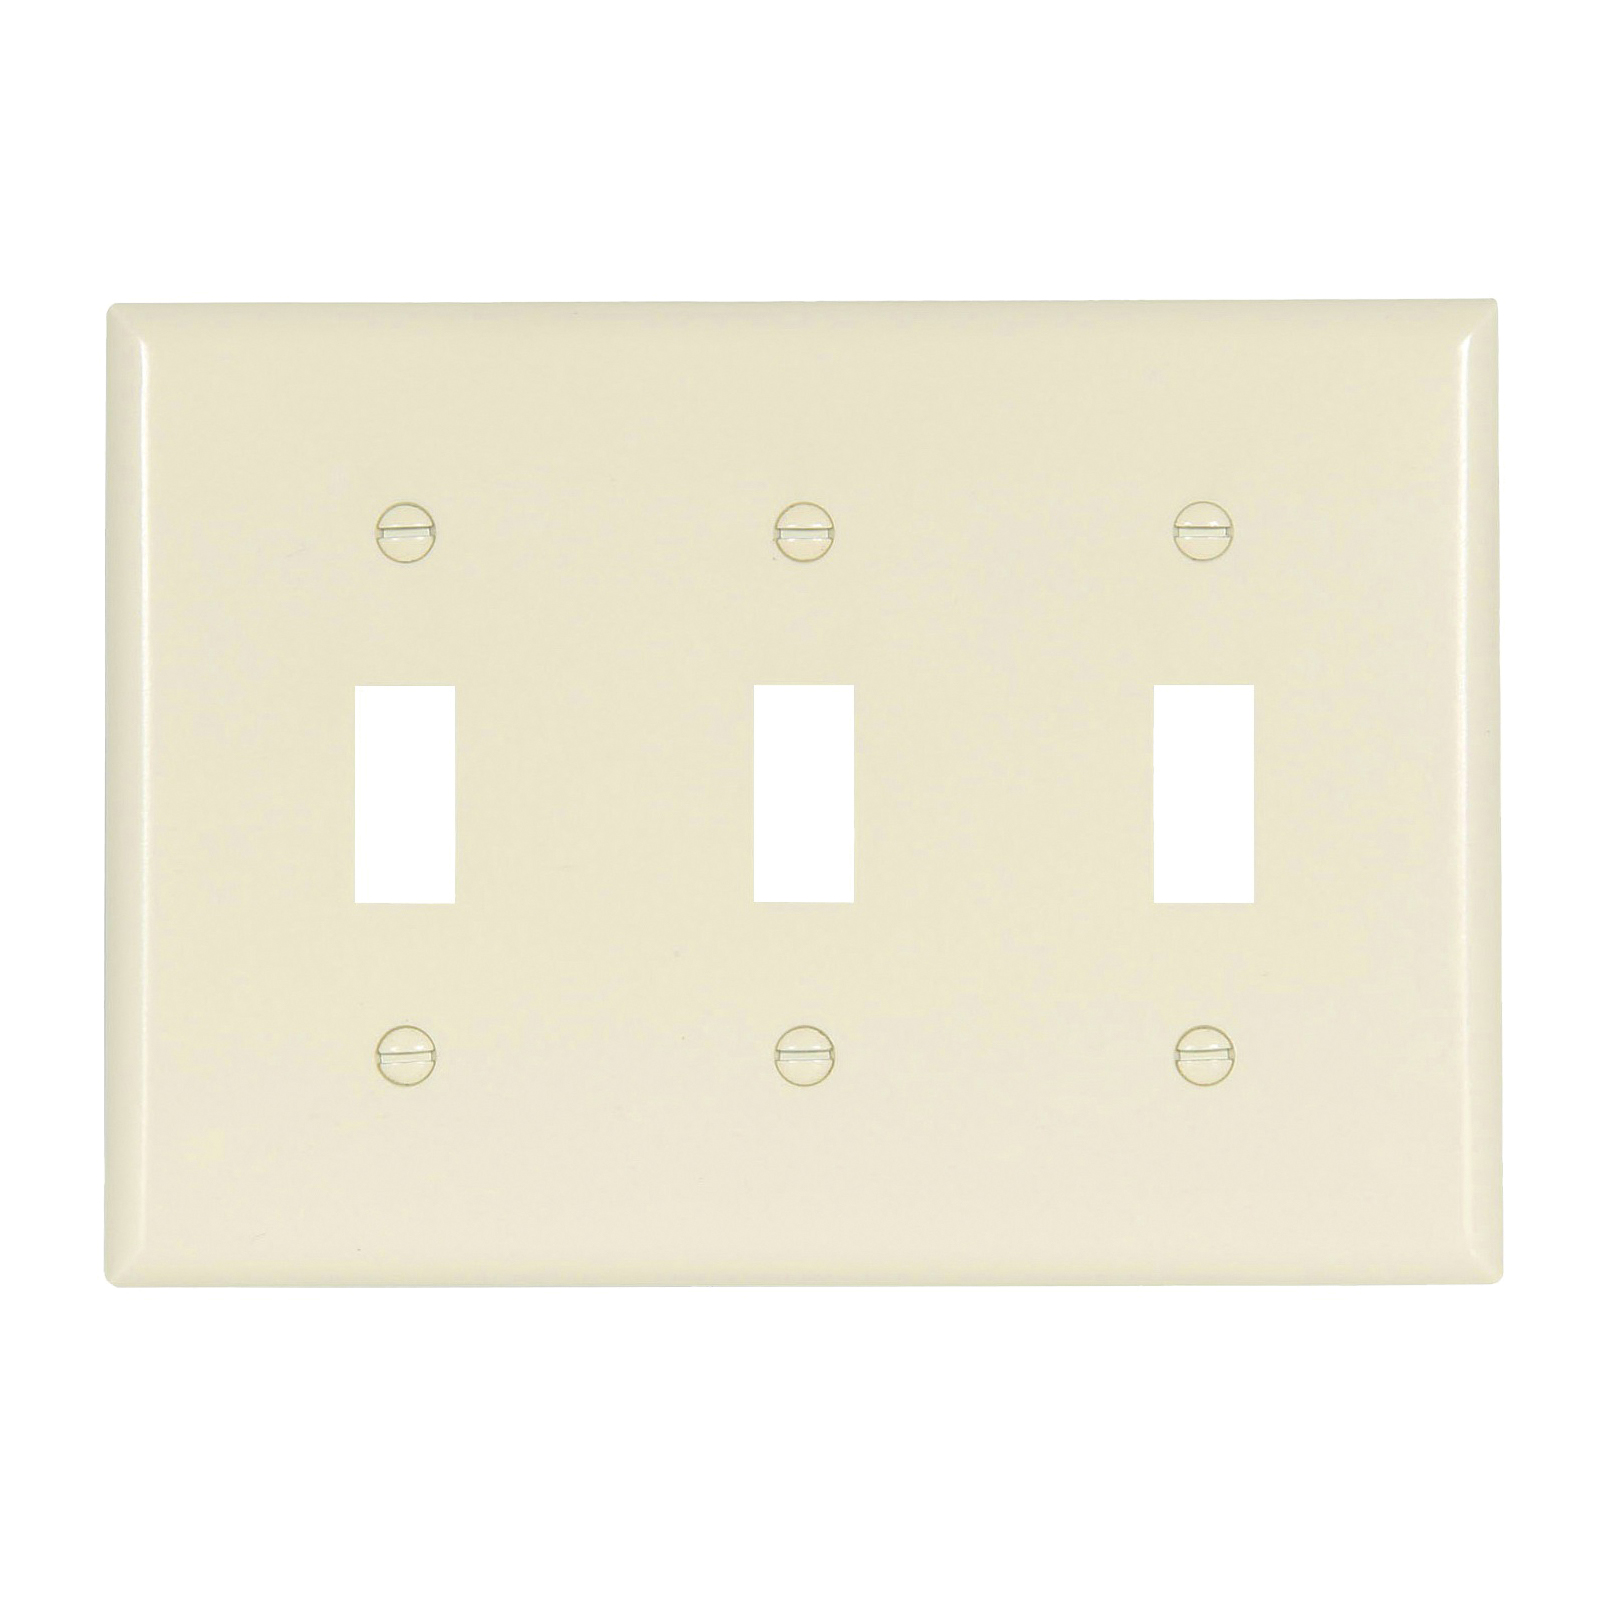 2141LA-BOX Wallplate, 4-1/2 in L, 3-3/8 in W, 3 -Gang, Thermoset, Light Almond, High-Gloss